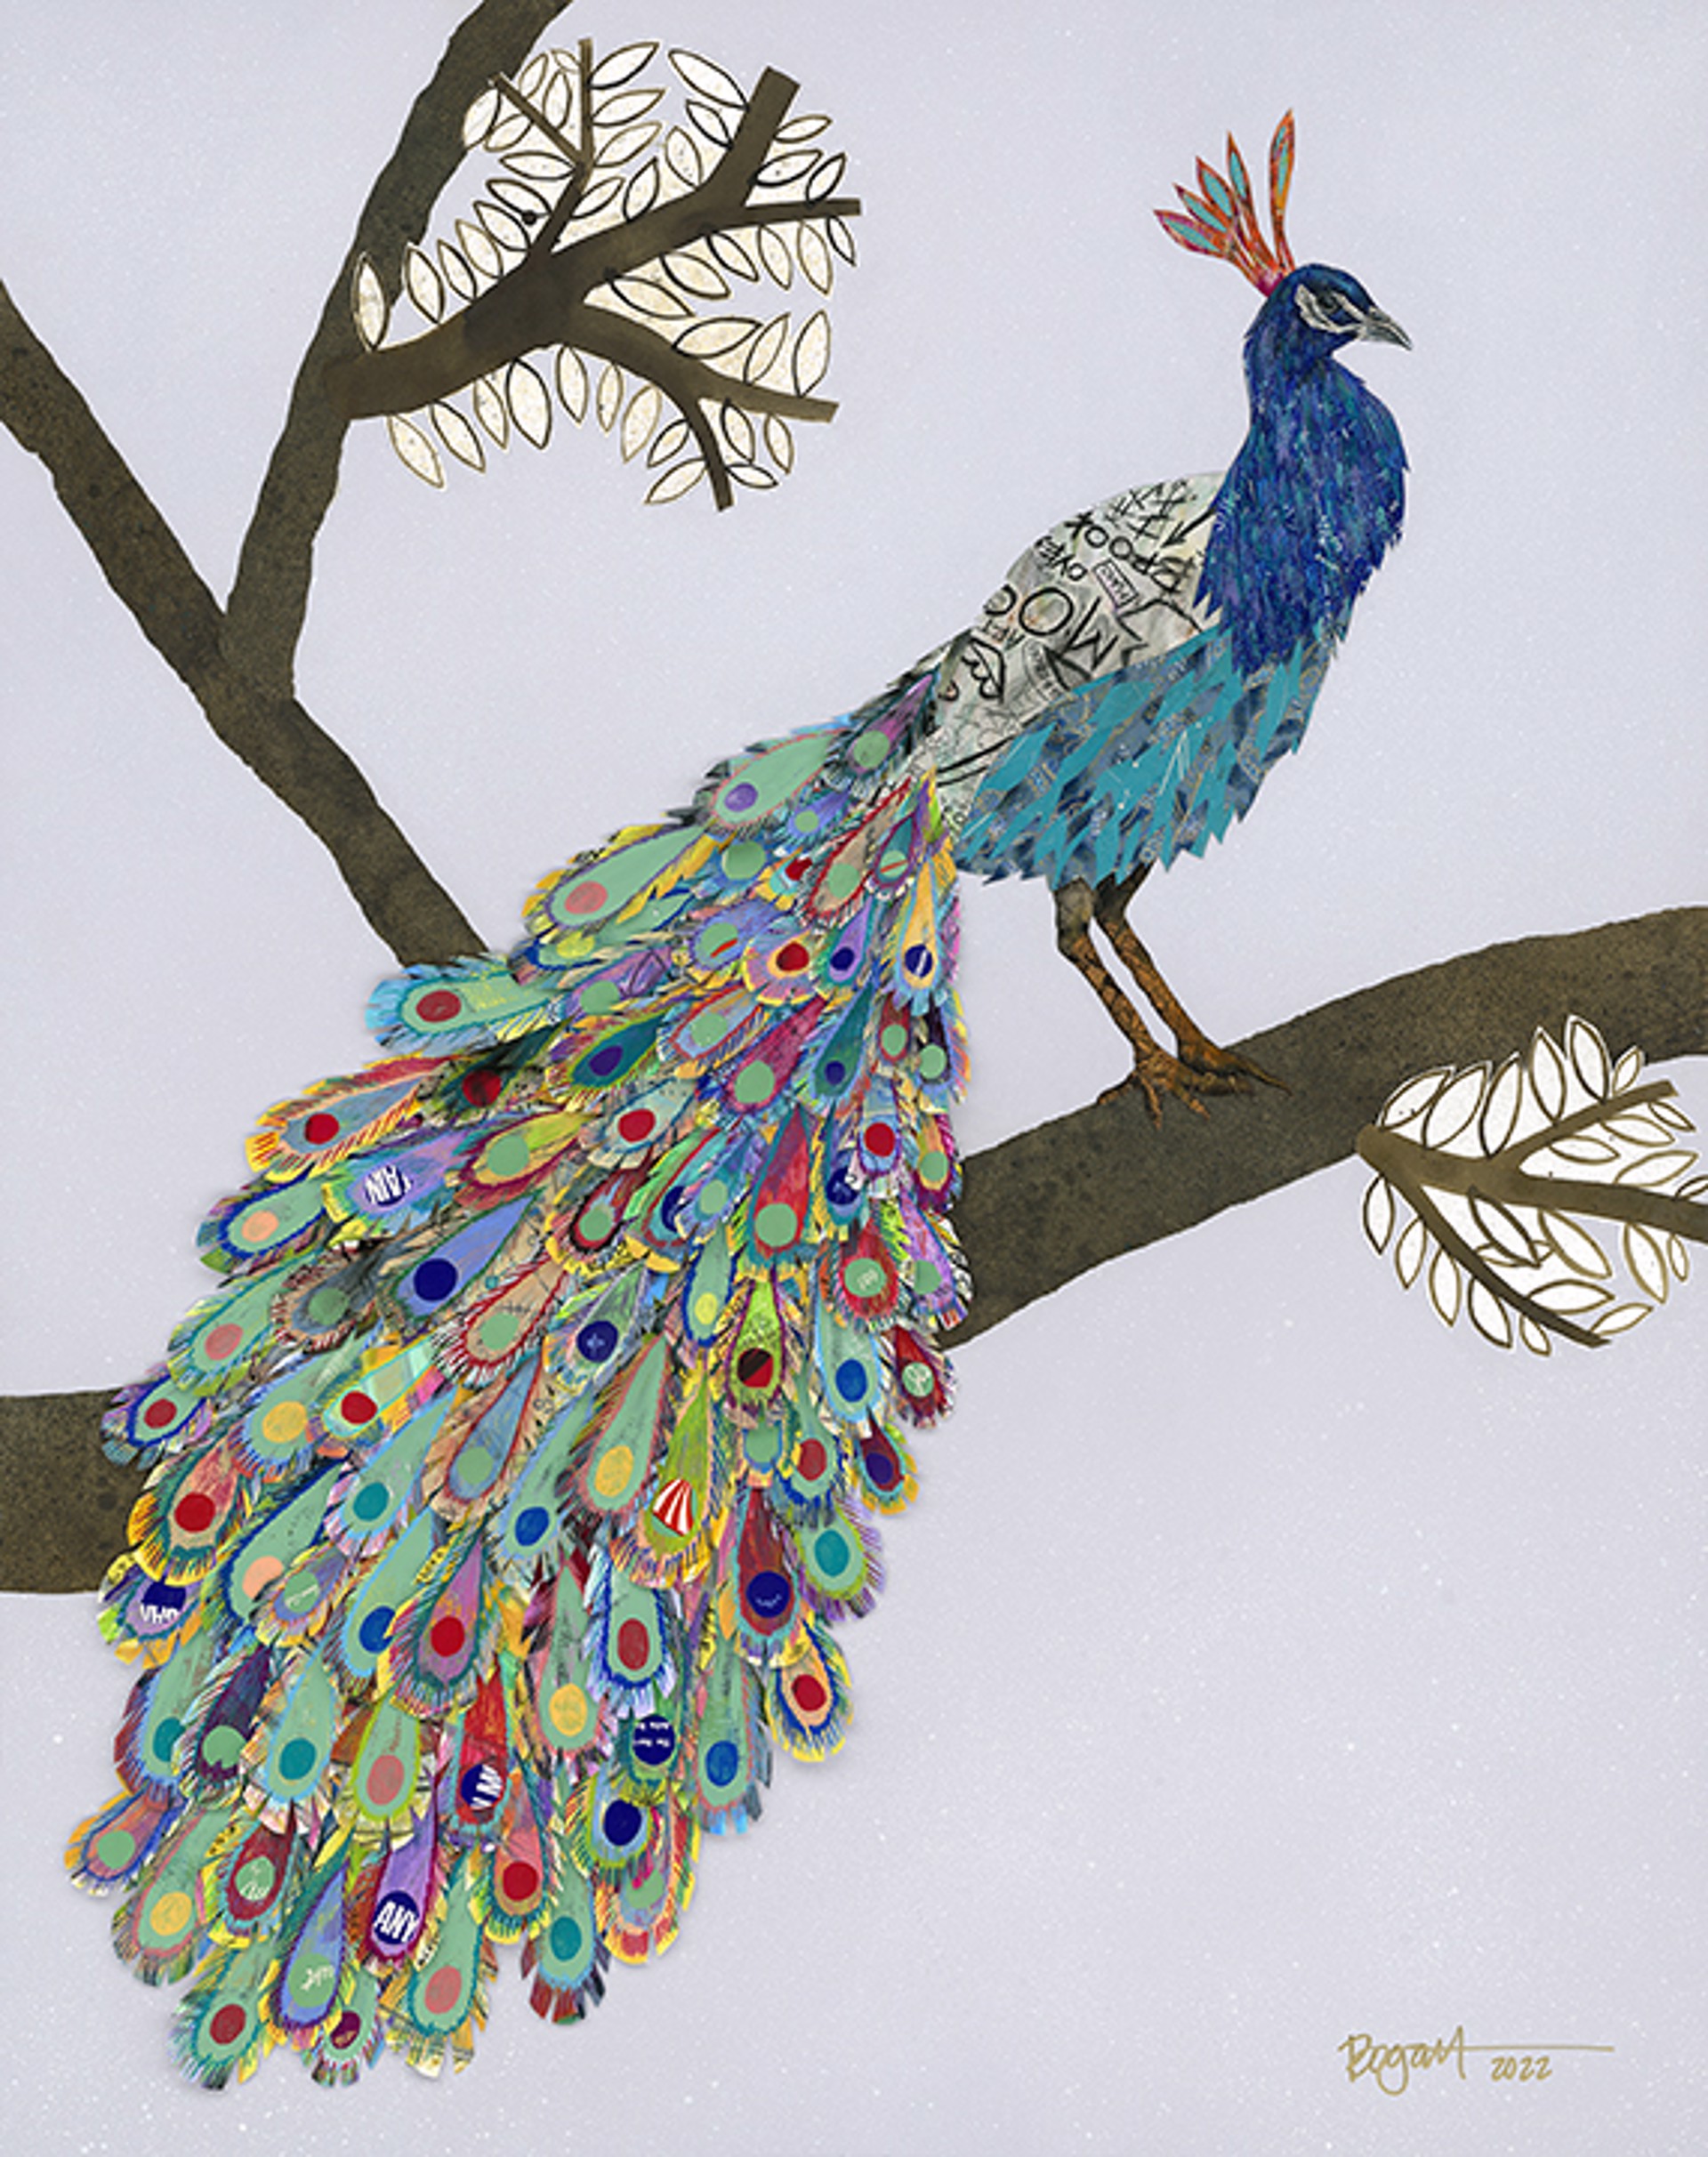 Paolo the Peacock by Brenda Bogart